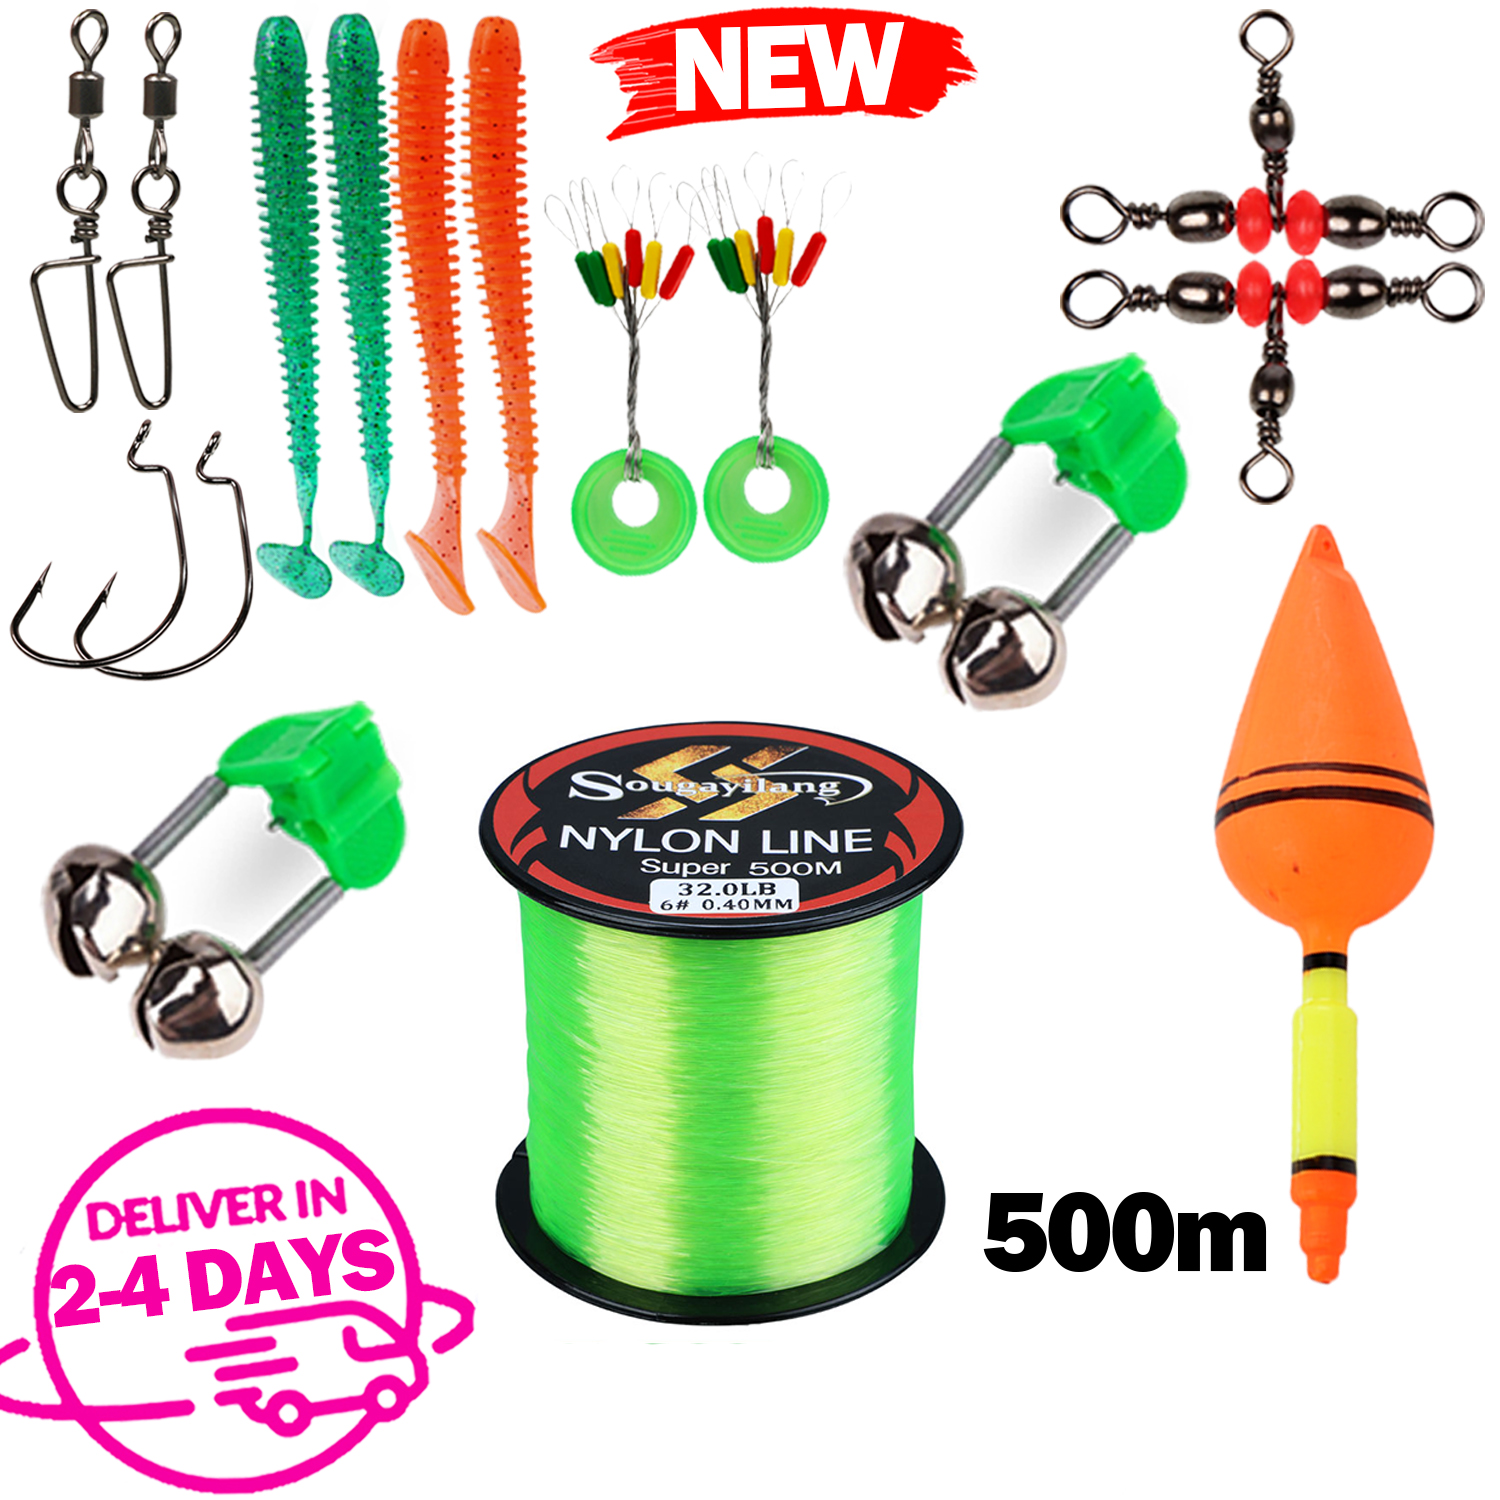 COD]Fishing Accessories Set for Novice Including Fishing Lures Hooks  Fishing Pliers Necessary Accessories for Fishing Fishing Tackle Complete Set